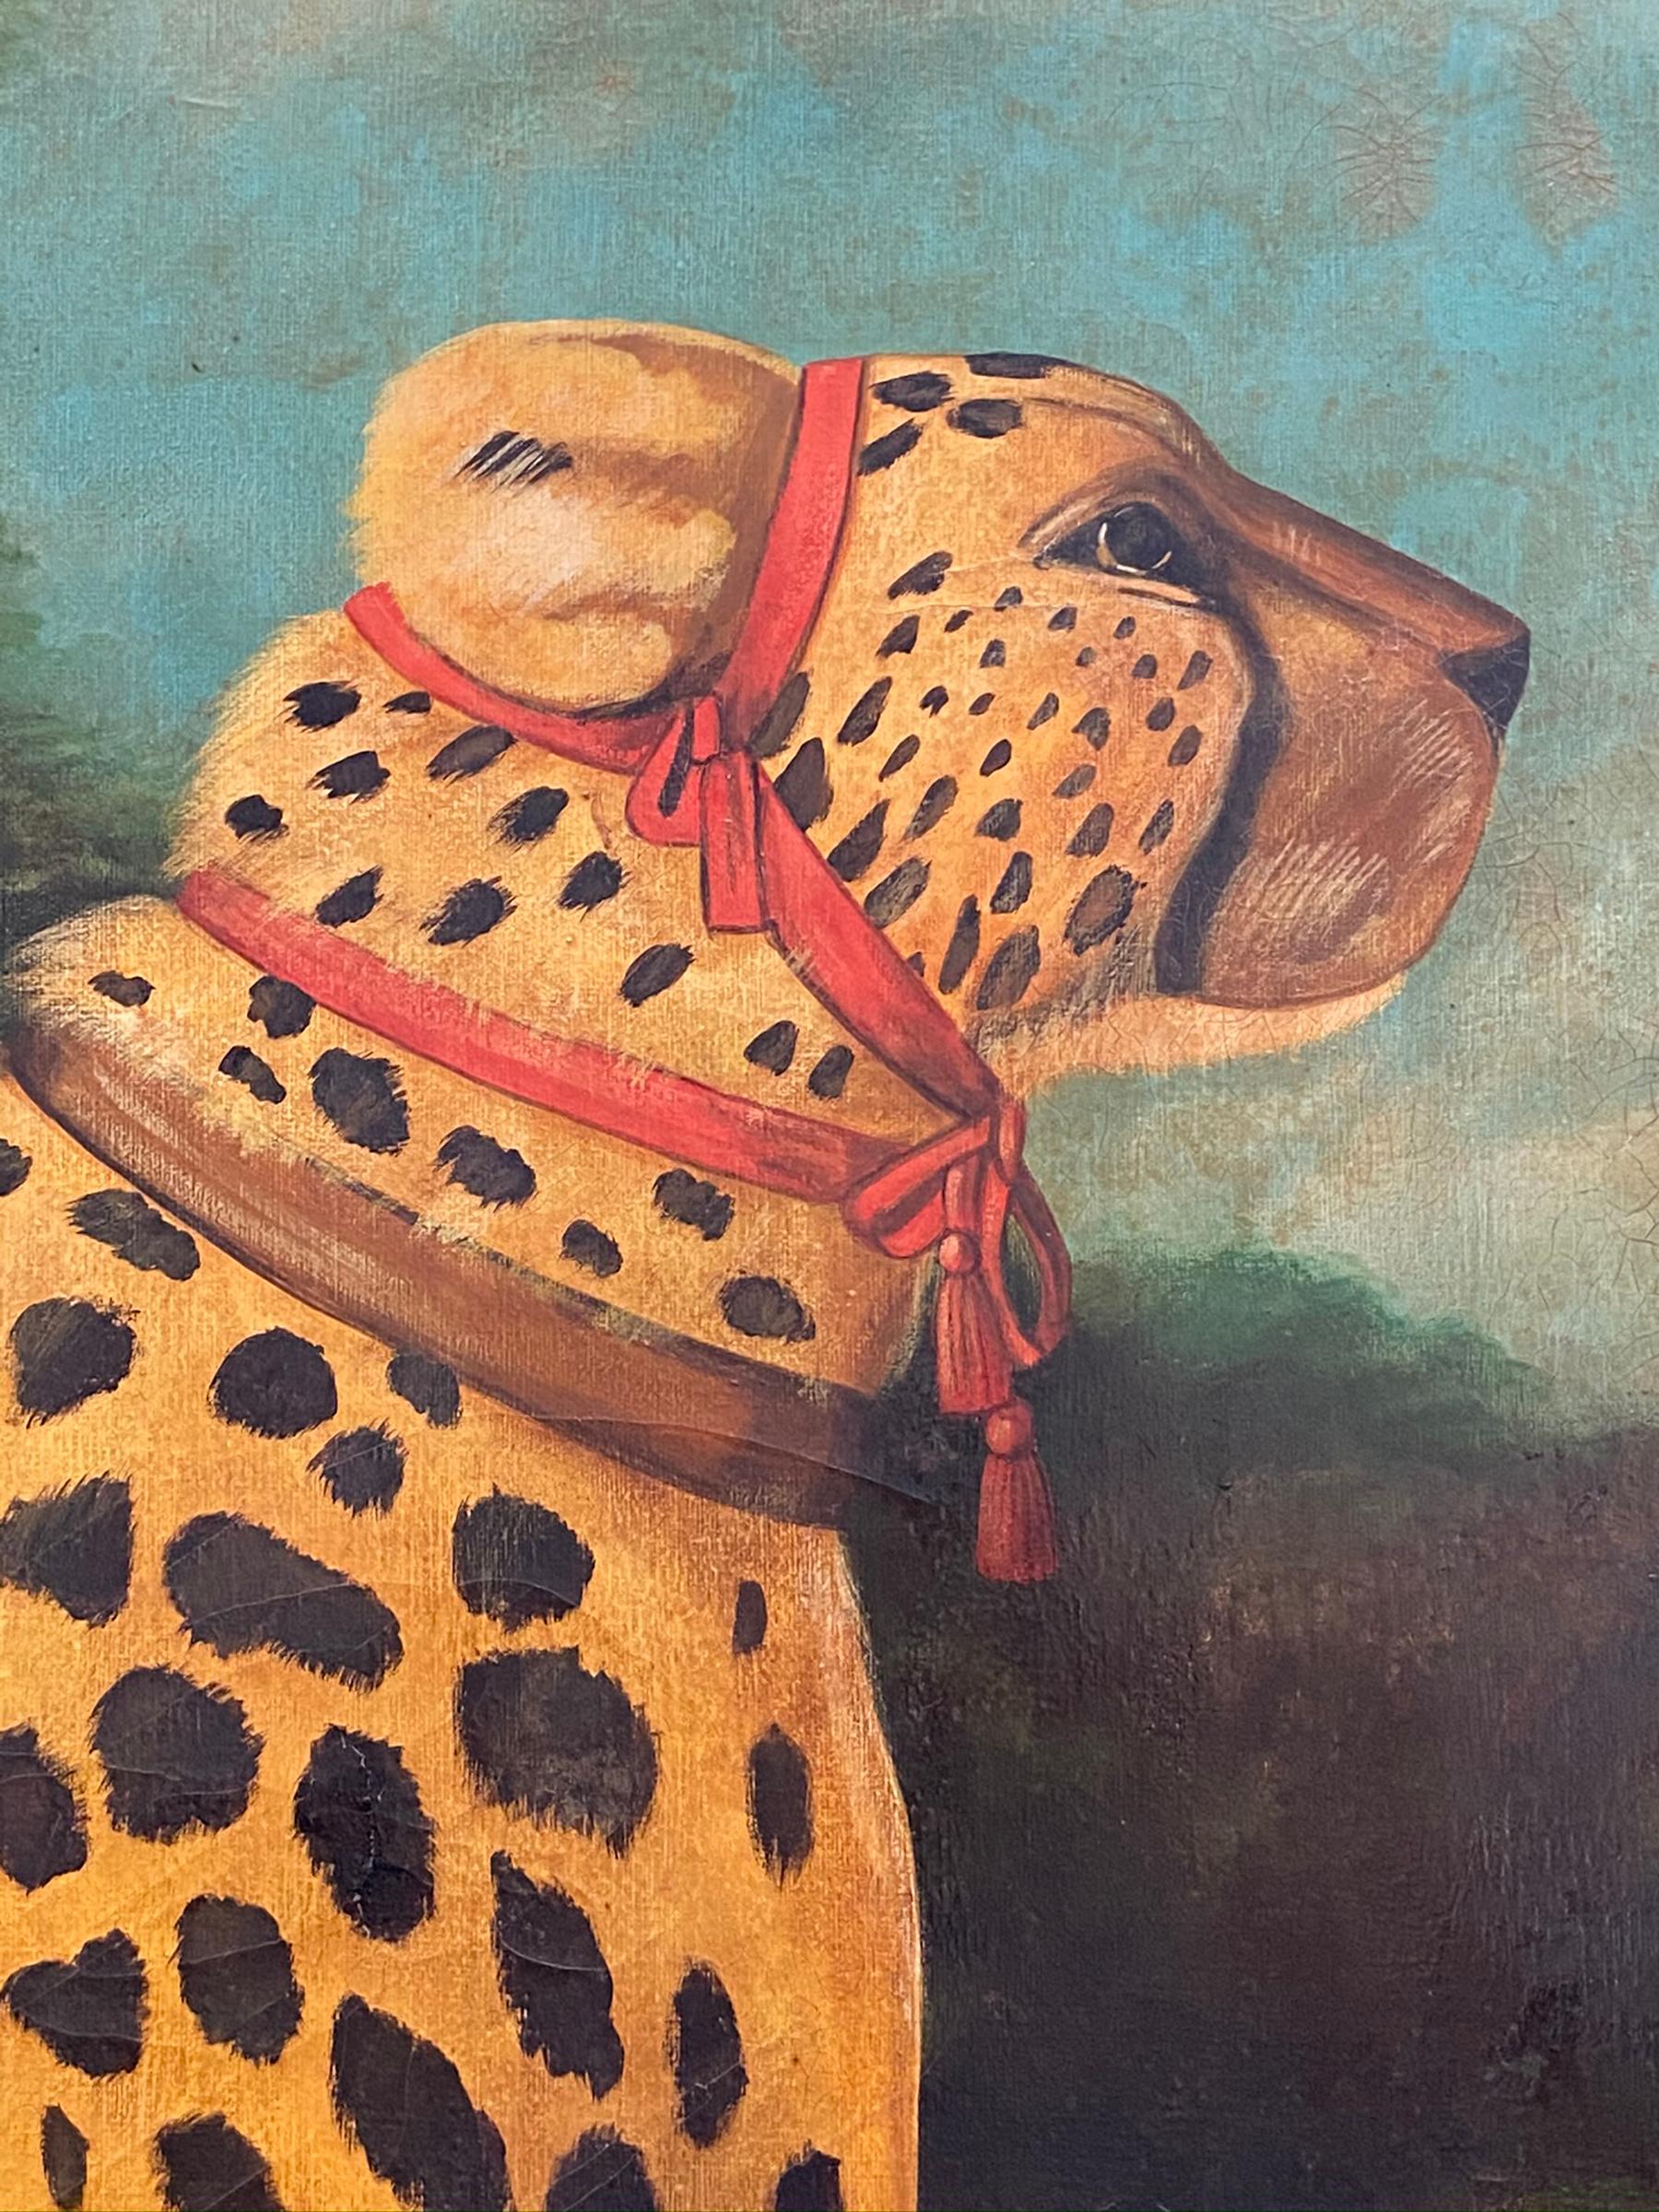 Oil painting on canvas of a chained leopard. Folk Art painting in the Victorian parlor style intentional aging and distressing. Signed William Skilling in the lower right.